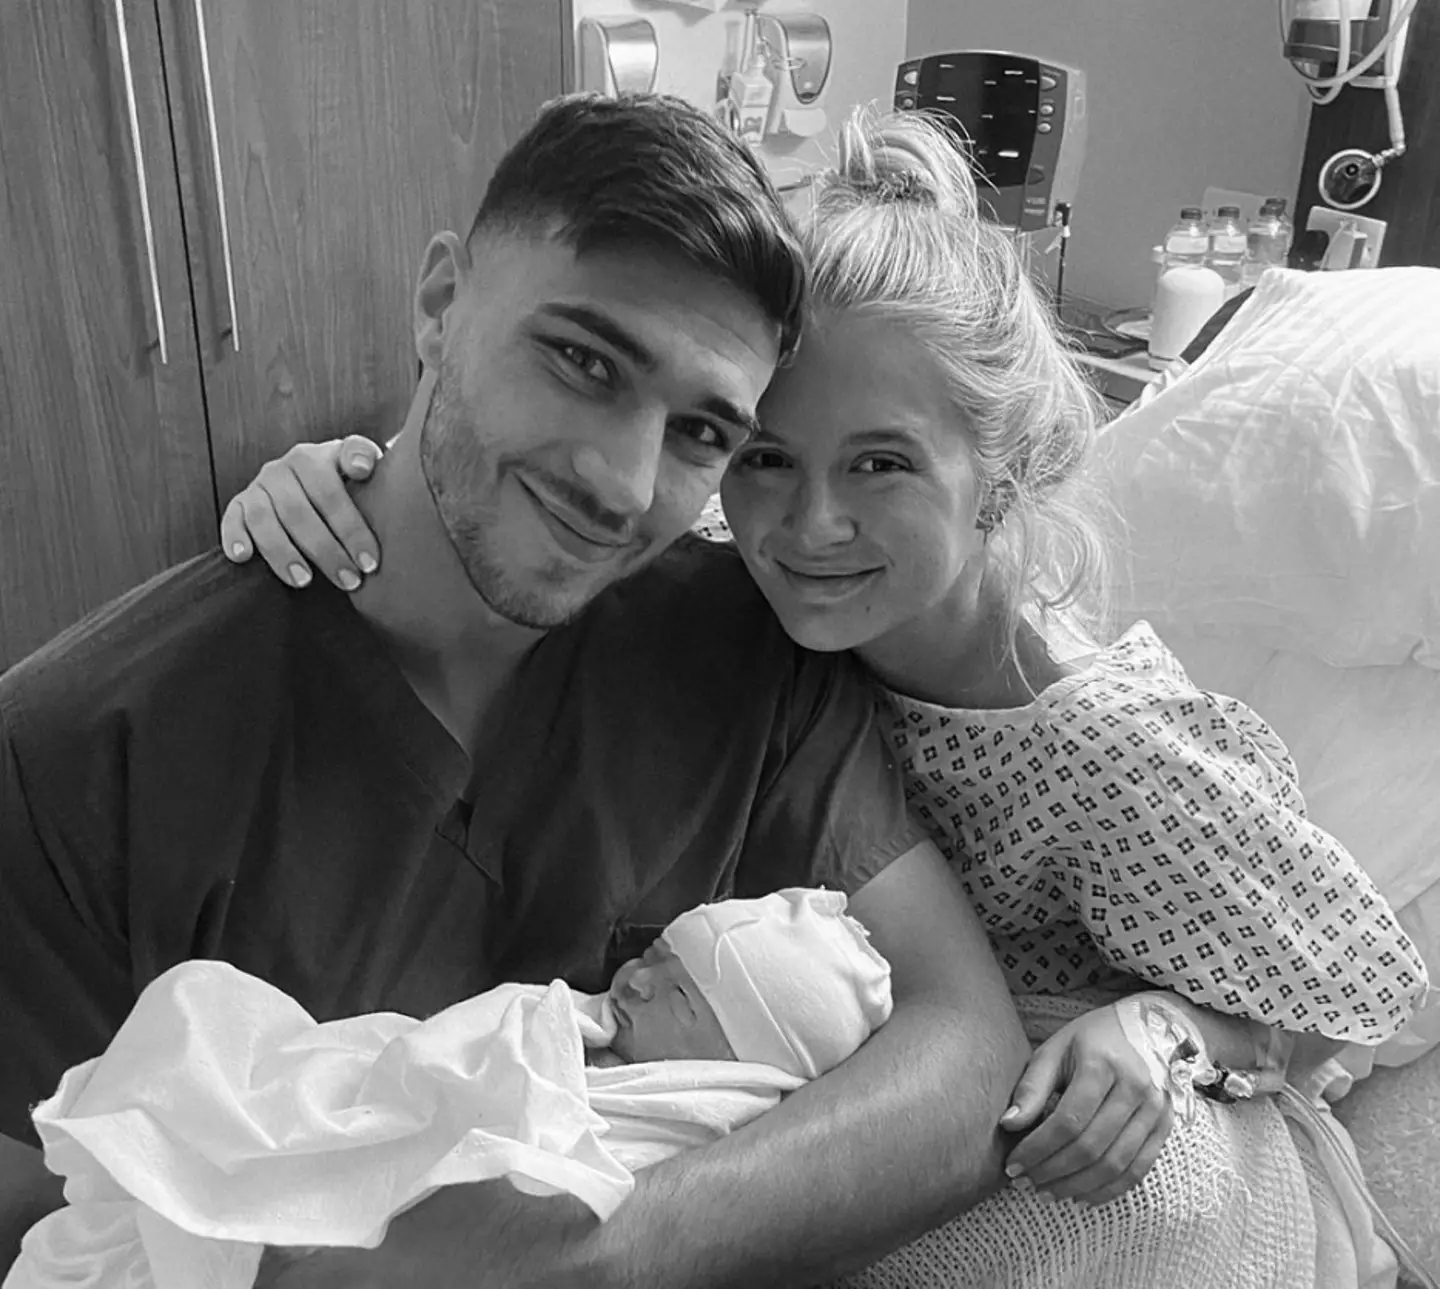 Molly-Mae and Tommy Fury's baby has arrived.